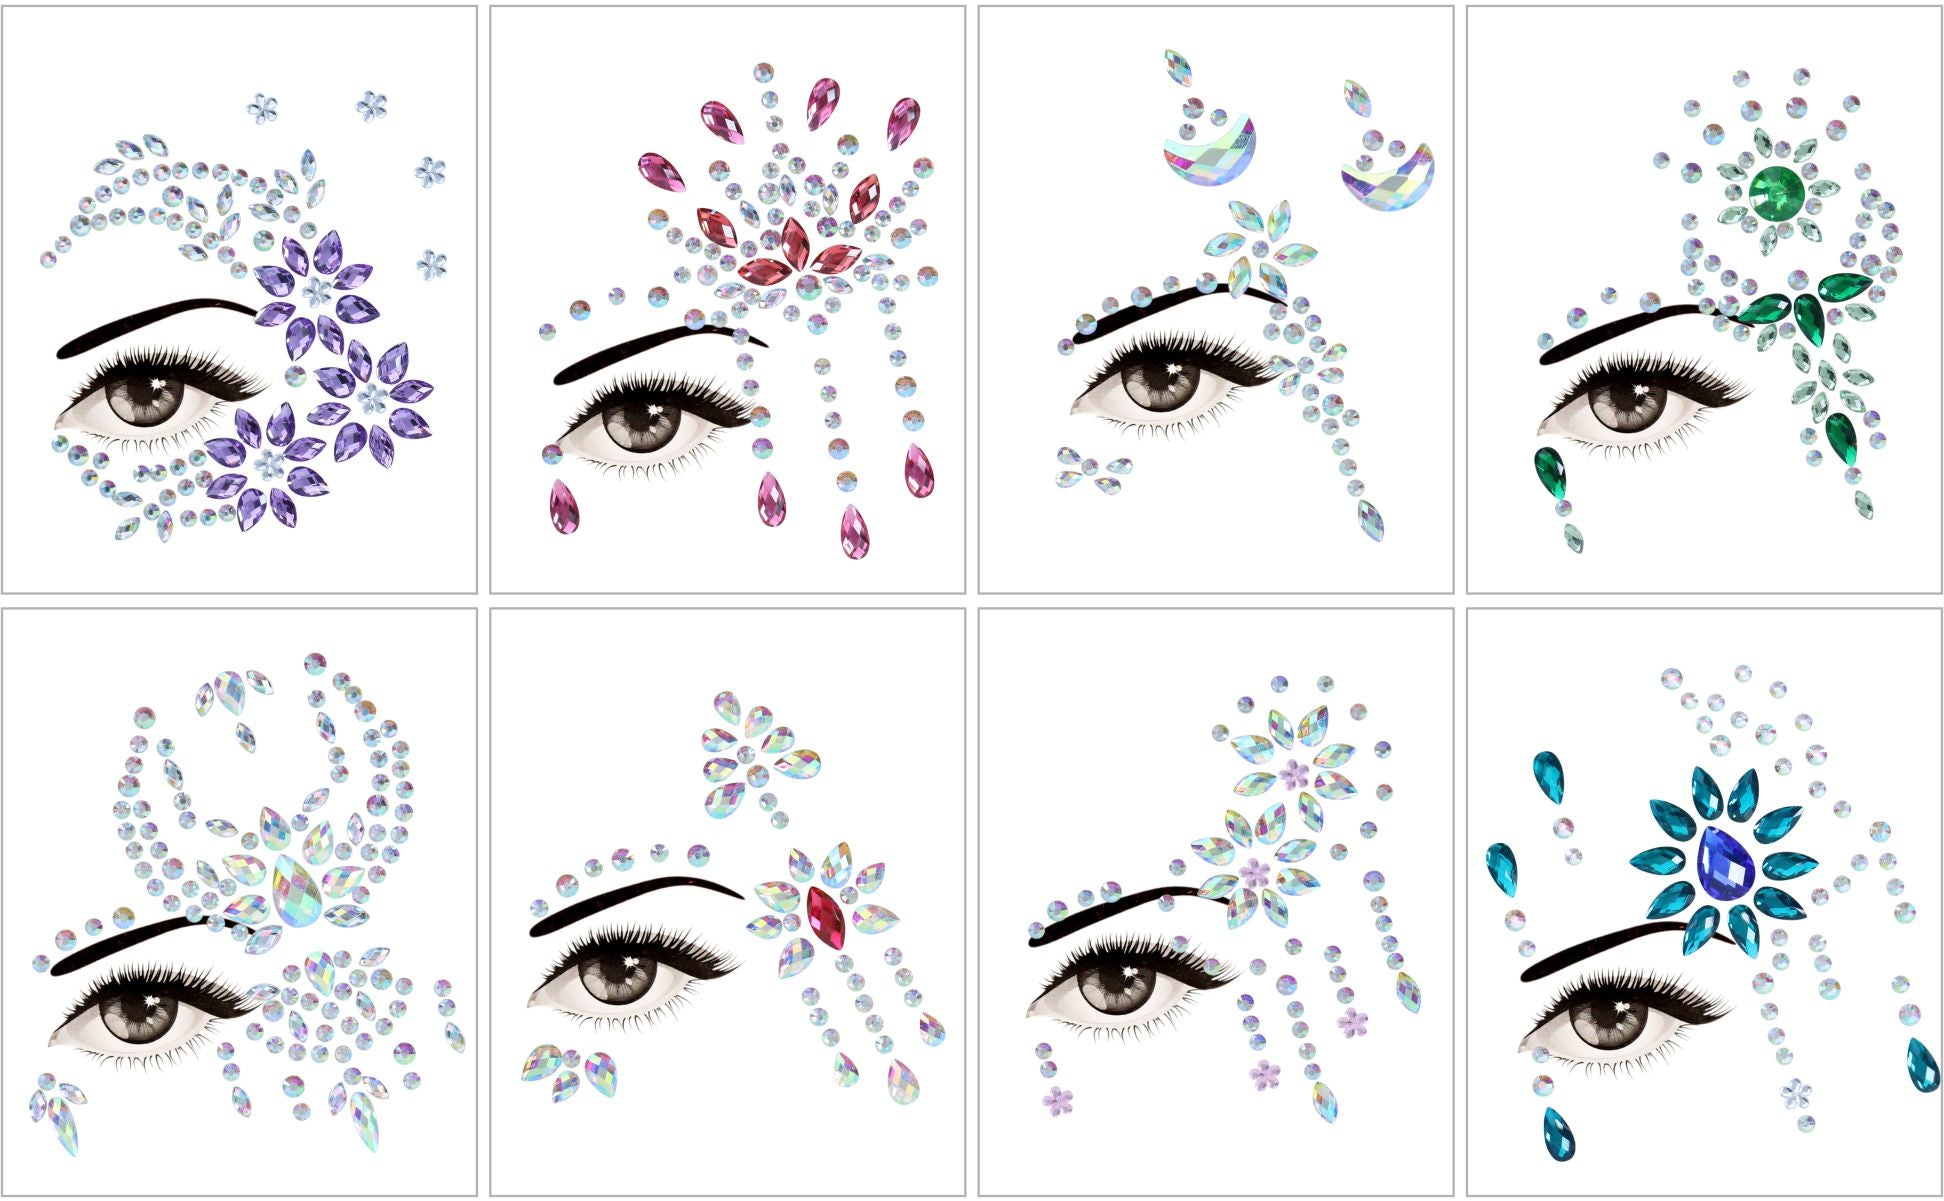 6 Sheets Face Gems Craft Jewels And Gems Face Jewelry Makeup